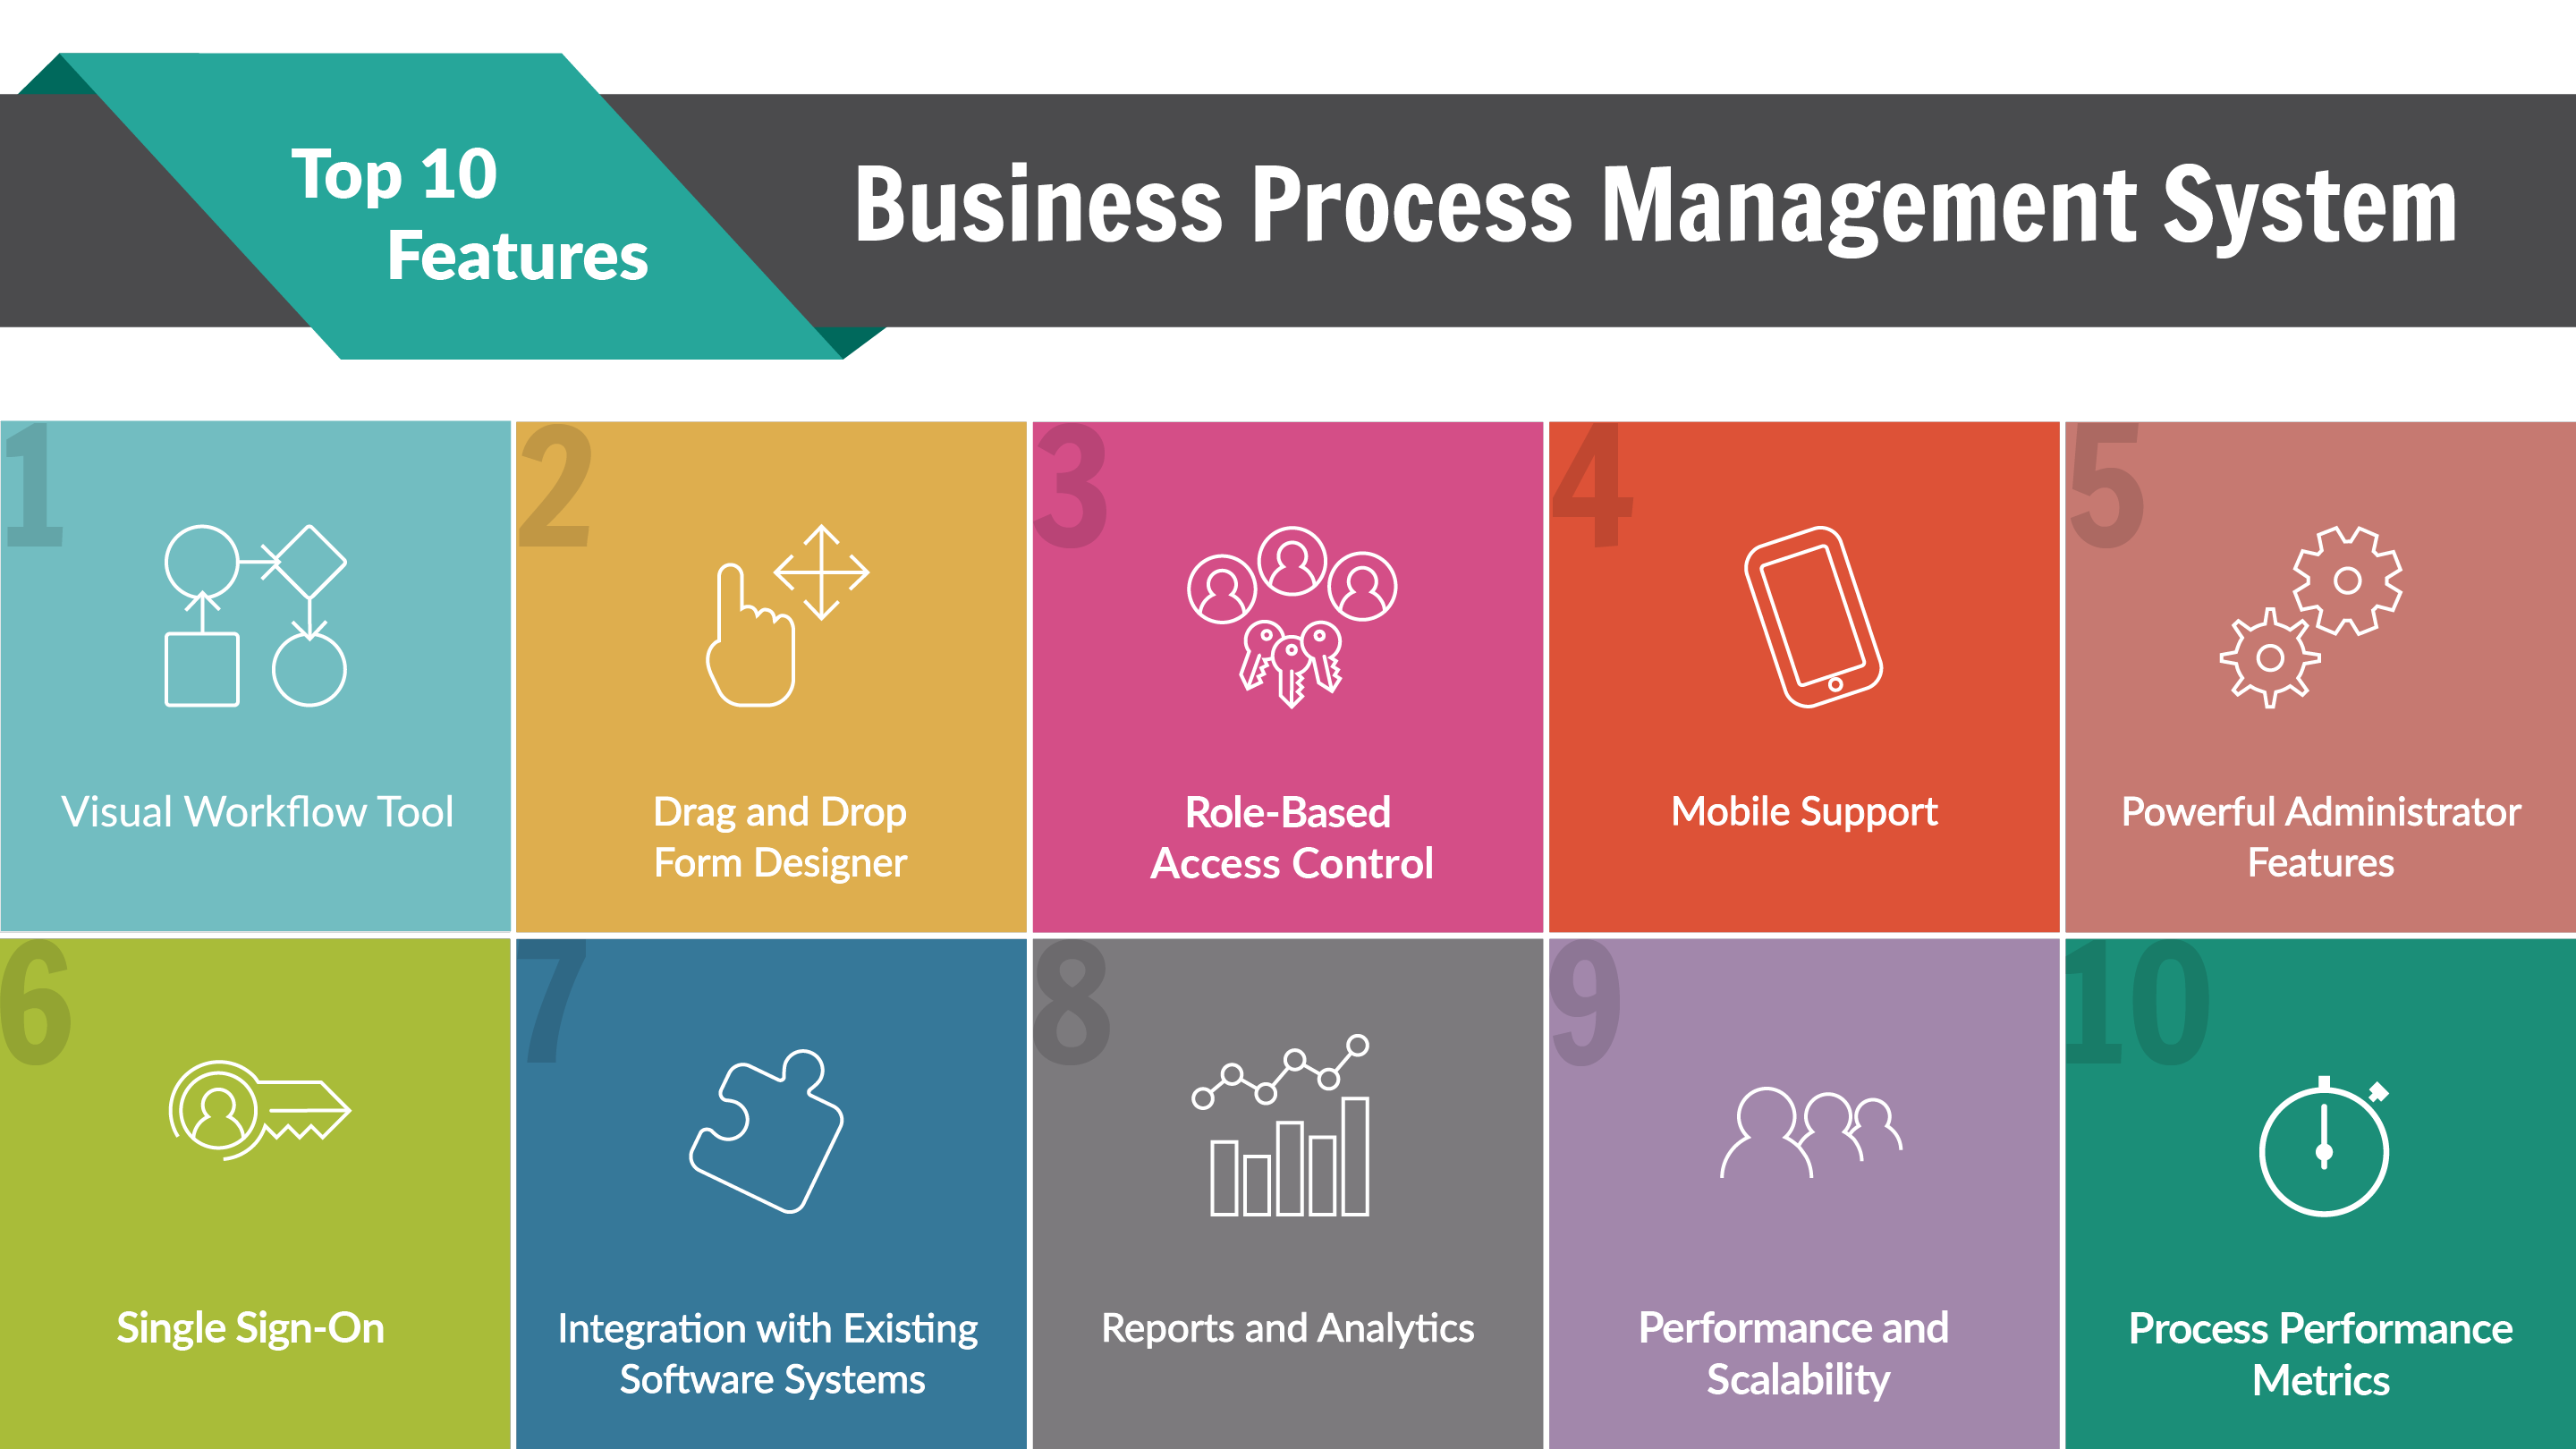 Bpm System Top 10 Features Of Business Process Management System